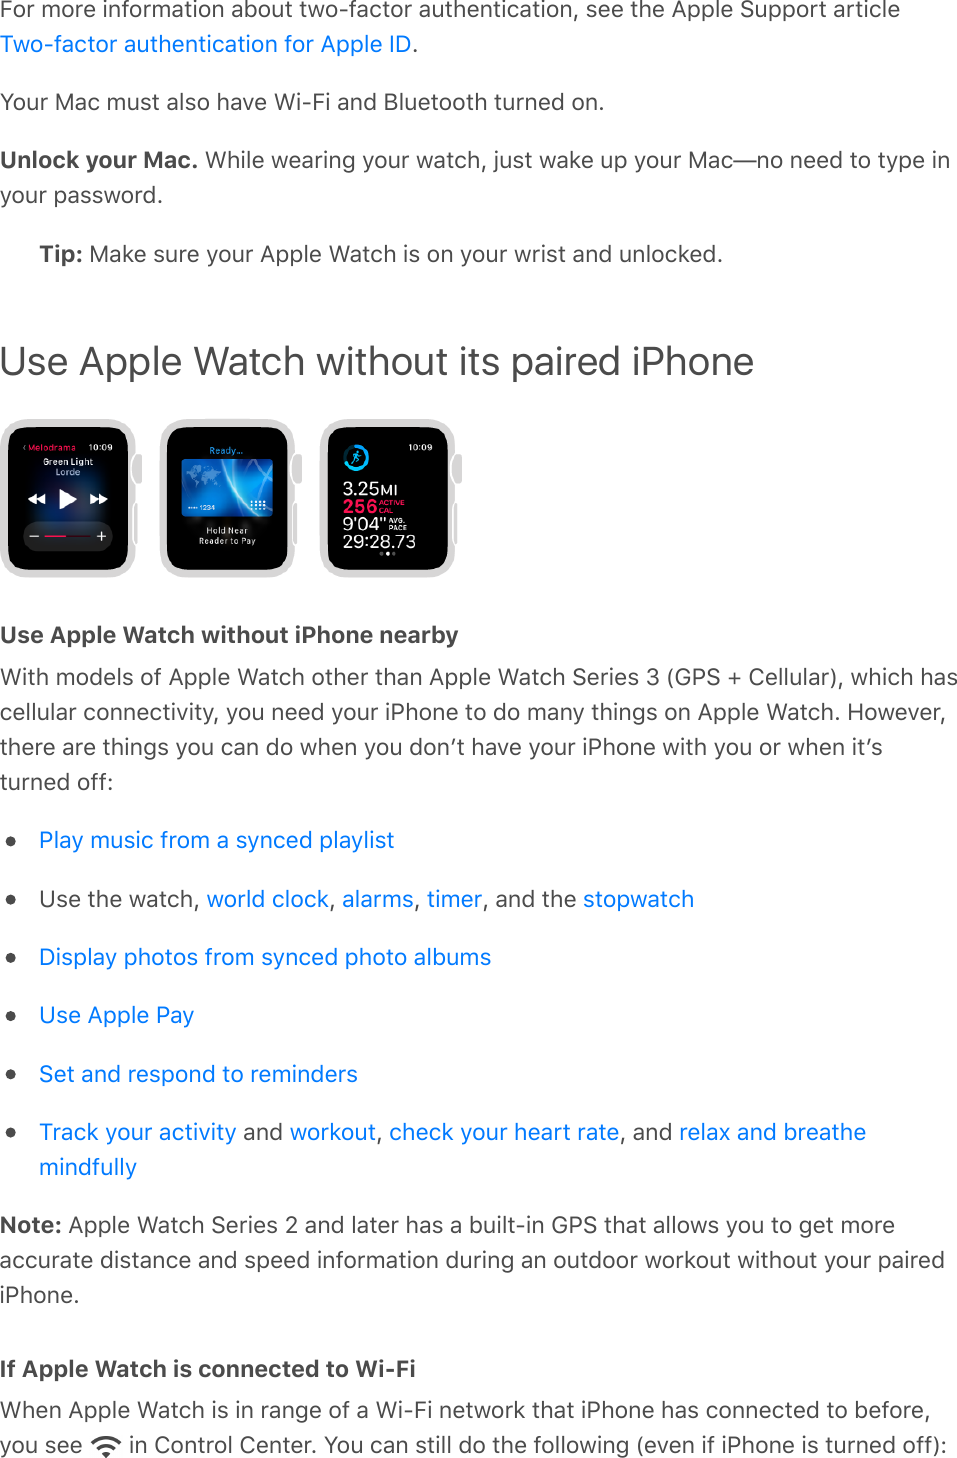 For more information about two-factor authentication, see the Apple Support article.Your Mac must also have Wi-Fi and Bluetooth turned on.Unlock your Mac. While wearing your watch, just wake up your Mac—no need to type inyour password.Tip: Make sure your Apple Watch is on your wrist and unlocked.Use Apple Watch without its paired iPhoneUse Apple Watch without iPhone nearbyWith models of Apple Watch other than Apple Watch Series 3 (GPS + Cellular), which hascellular connectivity, you need your iPhone to do many things on Apple Watch. However,there are things you can do when you donʼt have your iPhone with you or when itʼsturned off:Use the watch,  ,  ,  , and the  and  ,  , and Note: Apple Watch Series 2 and later has a built-in GPS that allows you to get moreaccurate distance and speed information during an outdoor workout without your pairediPhone.If Apple Watch is connected to Wi-FiWhen Apple Watch is in range of a Wi-Fi network that iPhone has connected to before,you see   in Control Center. You can still do the following (even if iPhone is turned off):Two-factor authentication for Apple IDPlay music from a synced playlistworld clock alarms timer stopwatchDisplay photos from synced photo albumsUse Apple PaySet and respond to remindersTrack your activity workout check your heart rate relax and breathemindfully